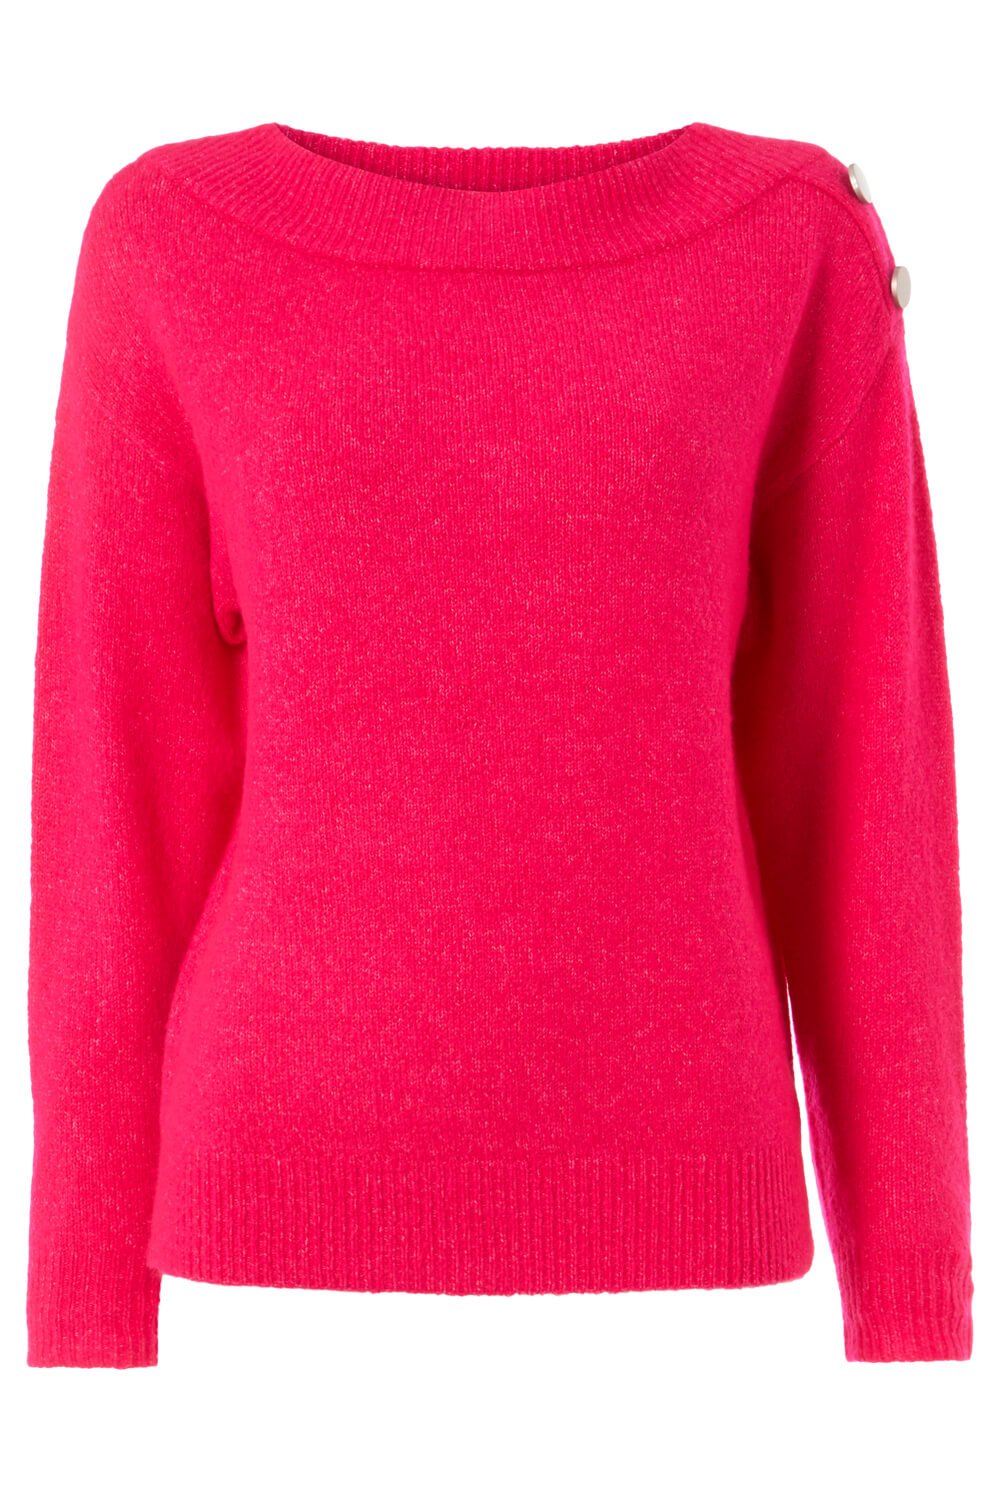 MAGENTA Button Detail Sleeve Jumper , Image 5 of 5